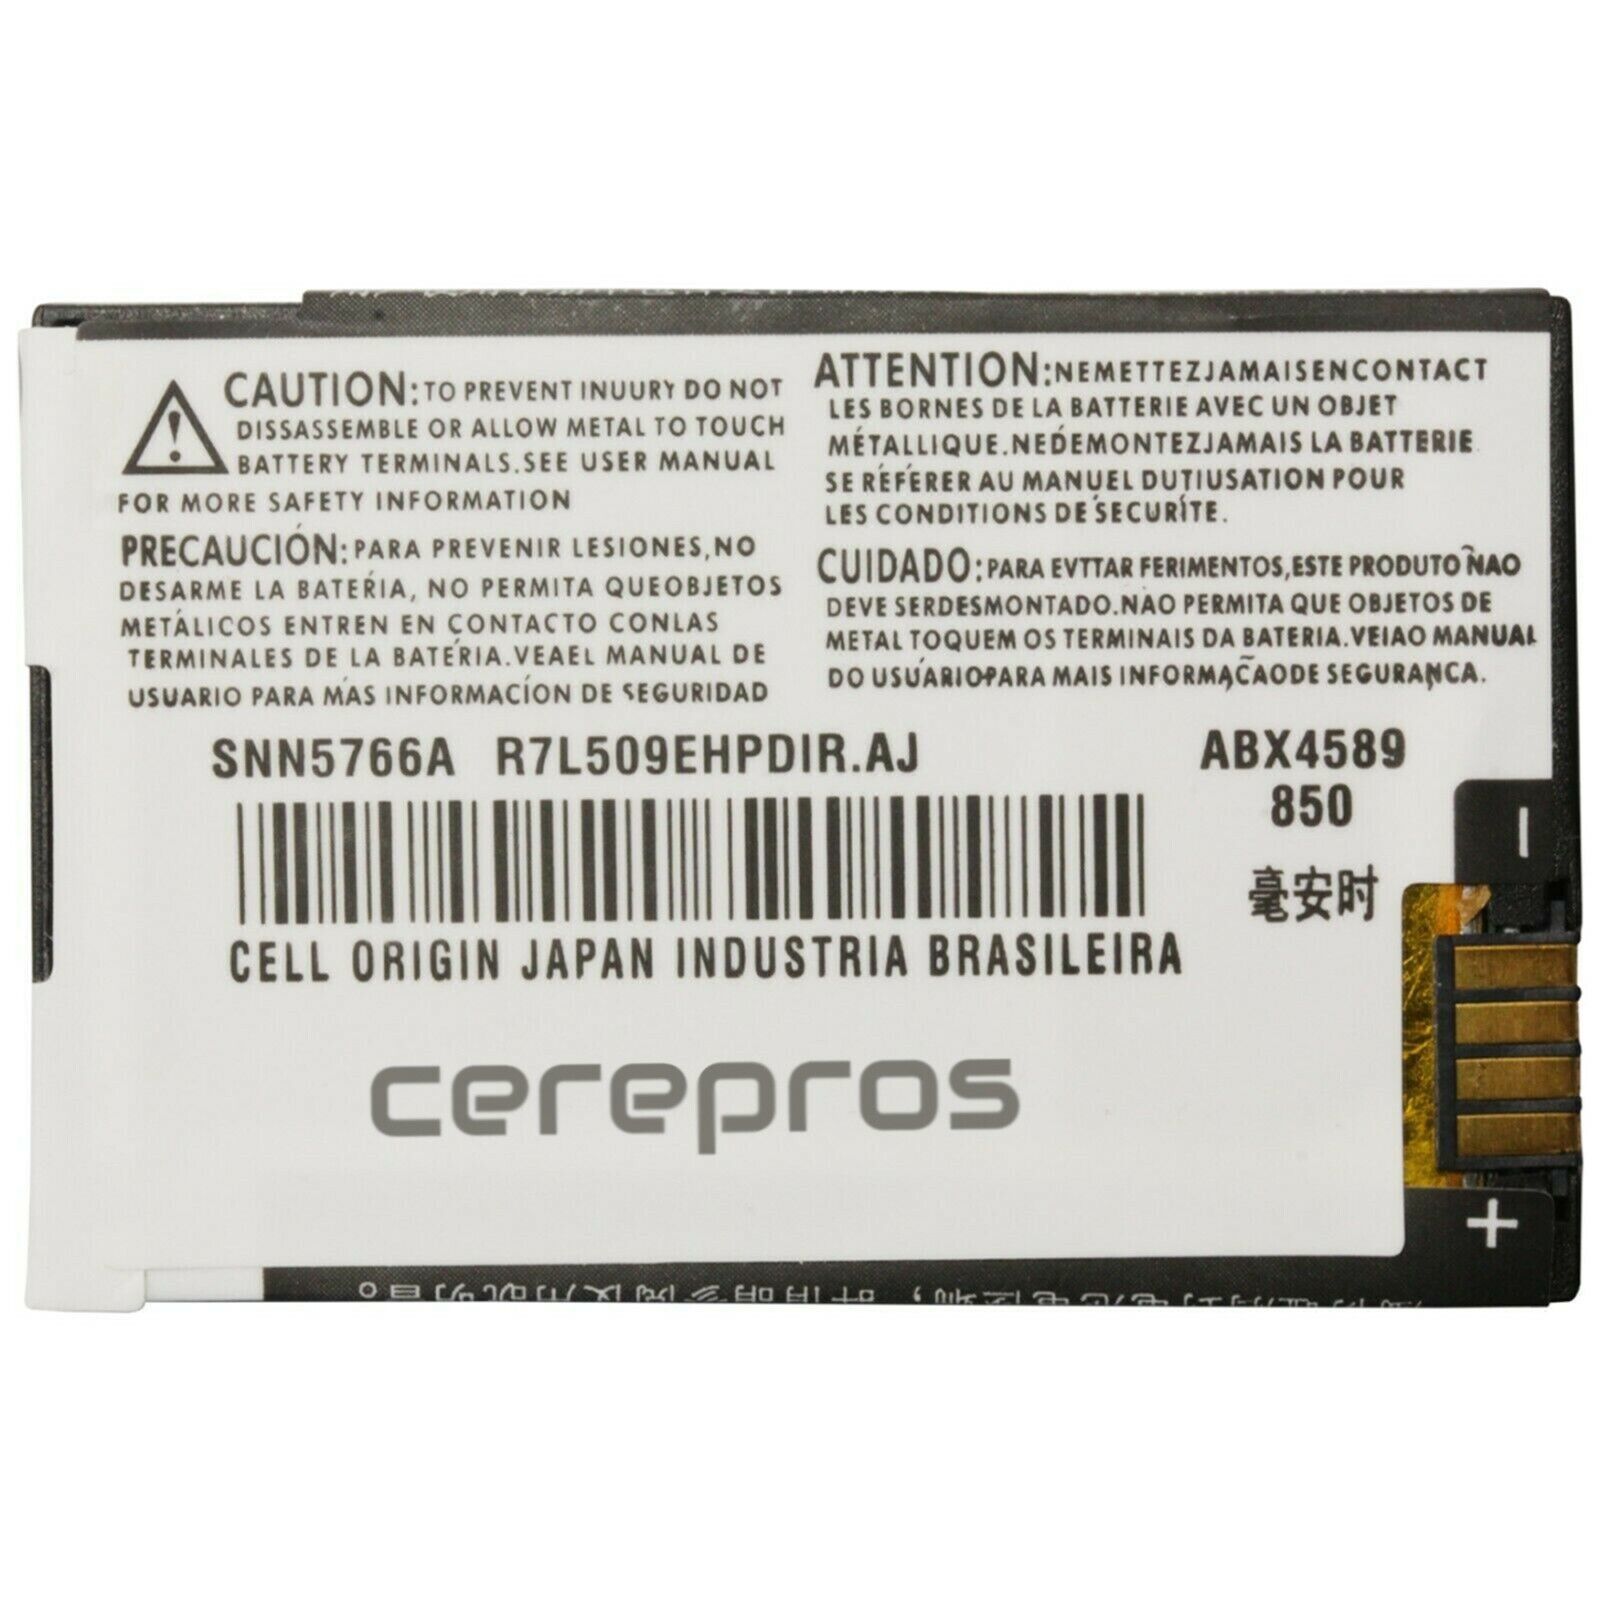 Replacement Cell Phone Battery For Motorola Bt50 Bt51 Battery Pack - $25.99